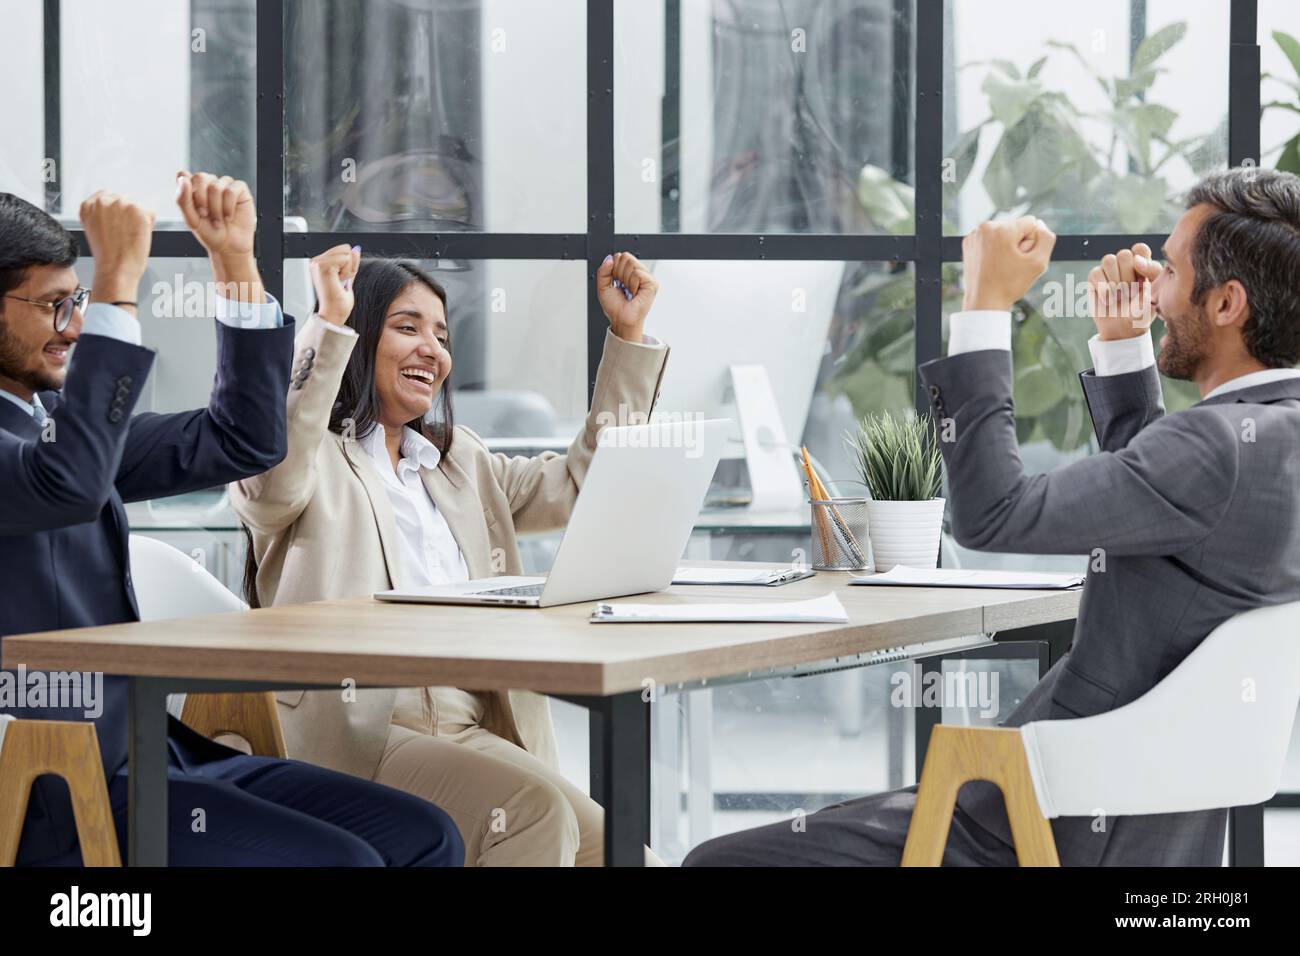 teamwork success win triumph concept at conference table Stock Photo